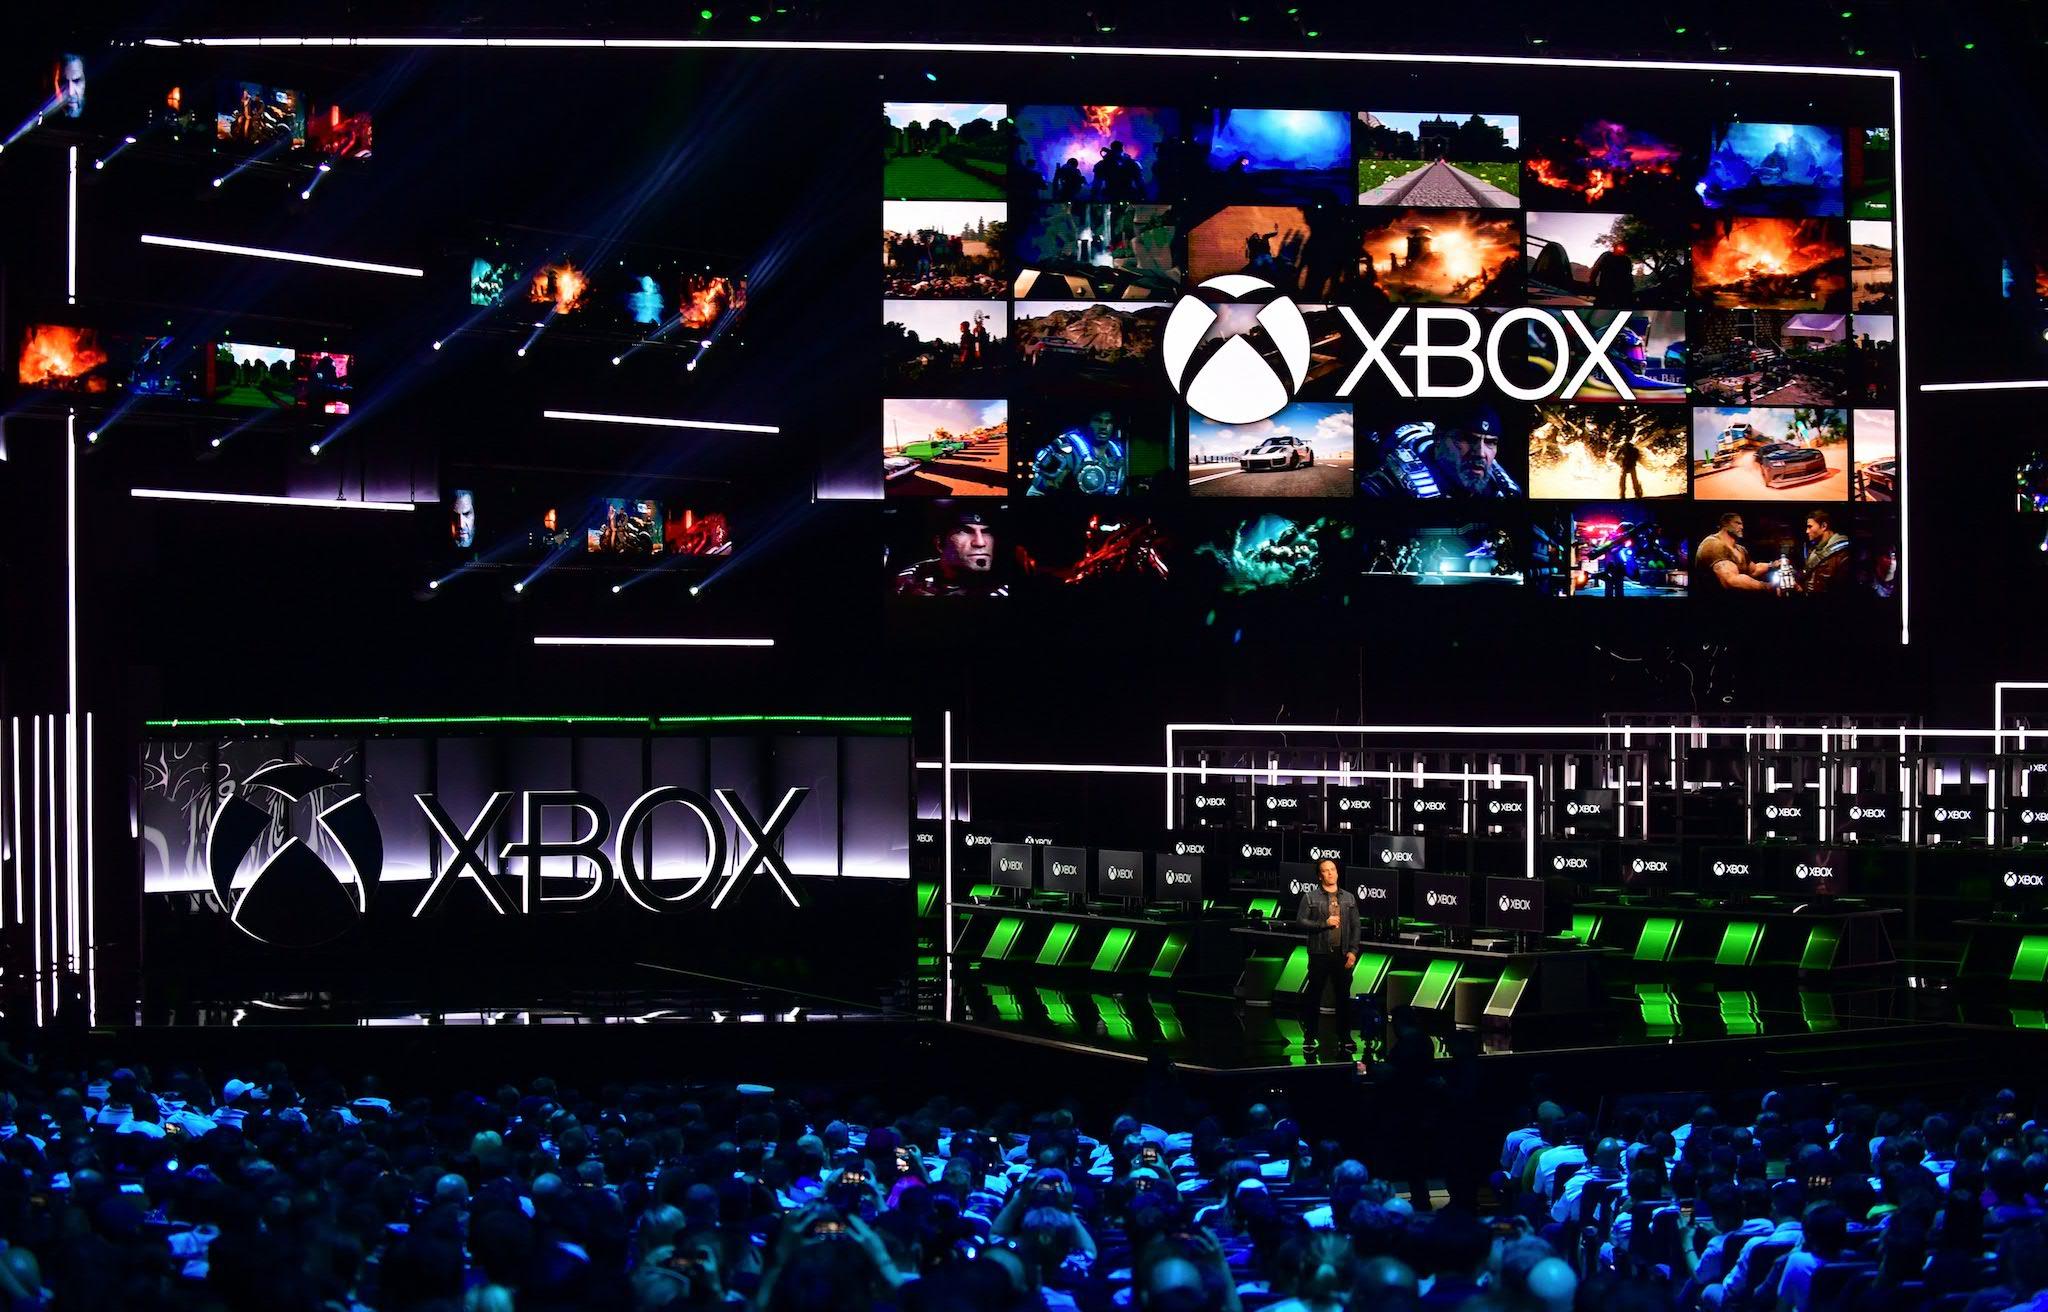 Phil Spencer talks EVERYTHING Xbox, PlayStation, Gaming, E3 2019